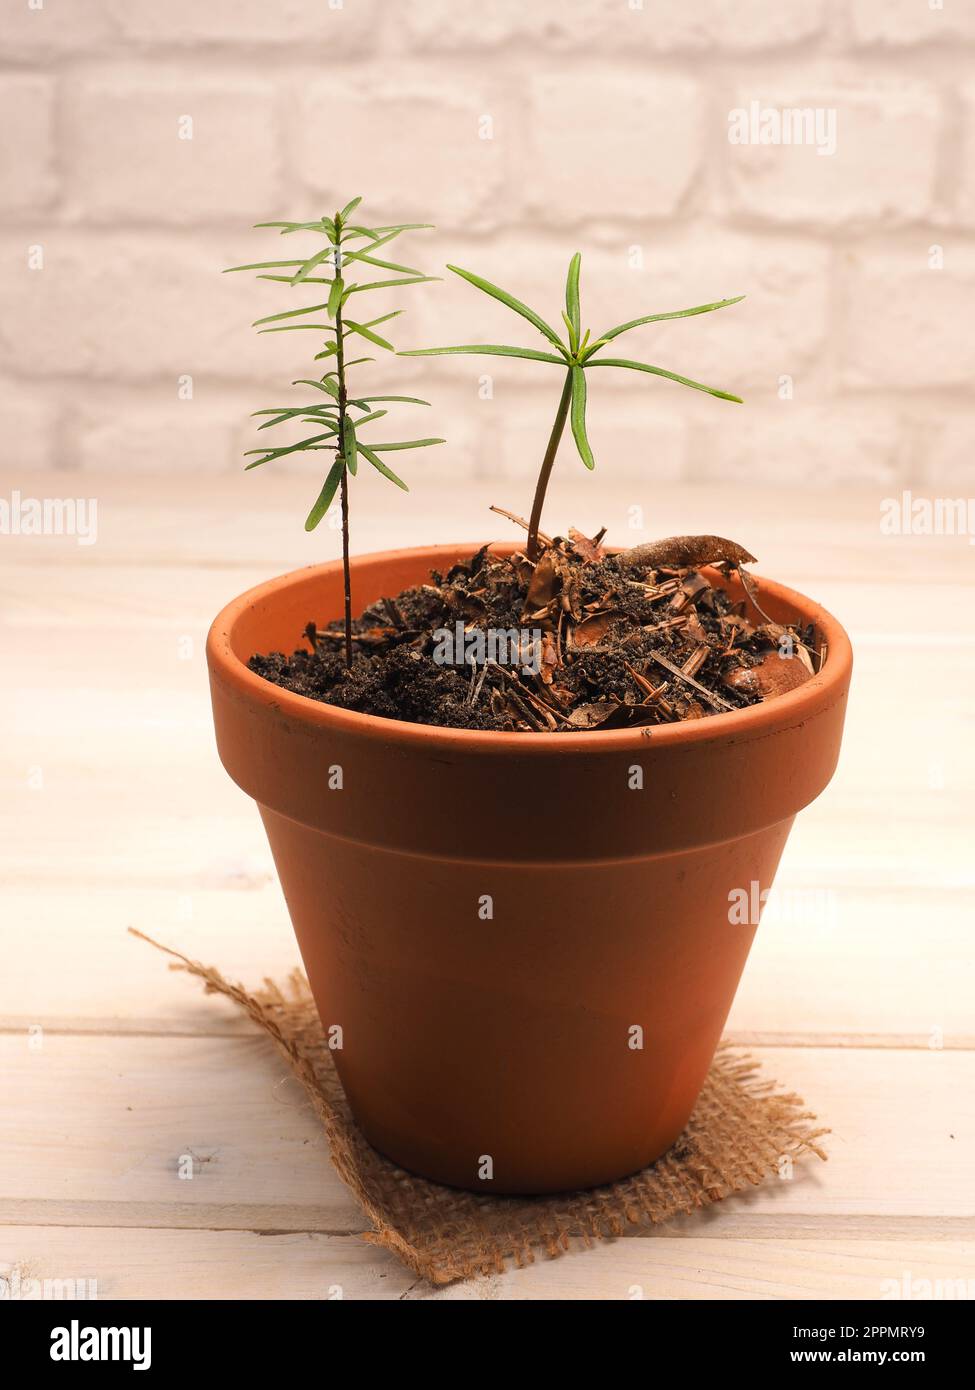 Small fir trees growing in a plant pot, reforestation or cultivation concept, natural carbon dioxide storage against climate change. Stock Photo